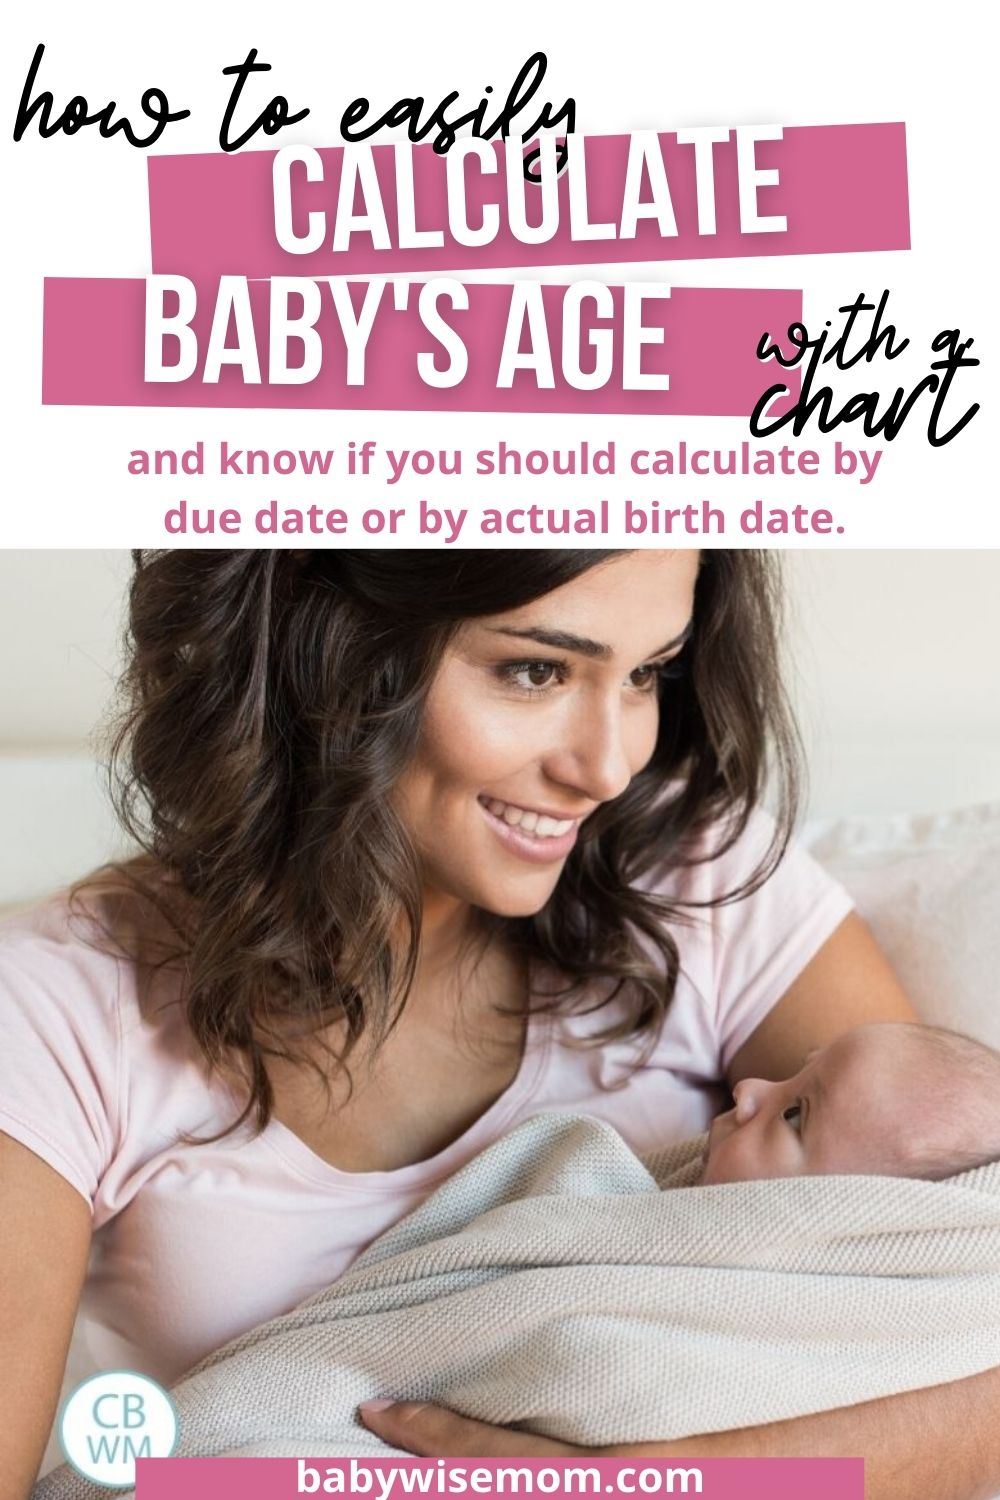 How to calculate babys age